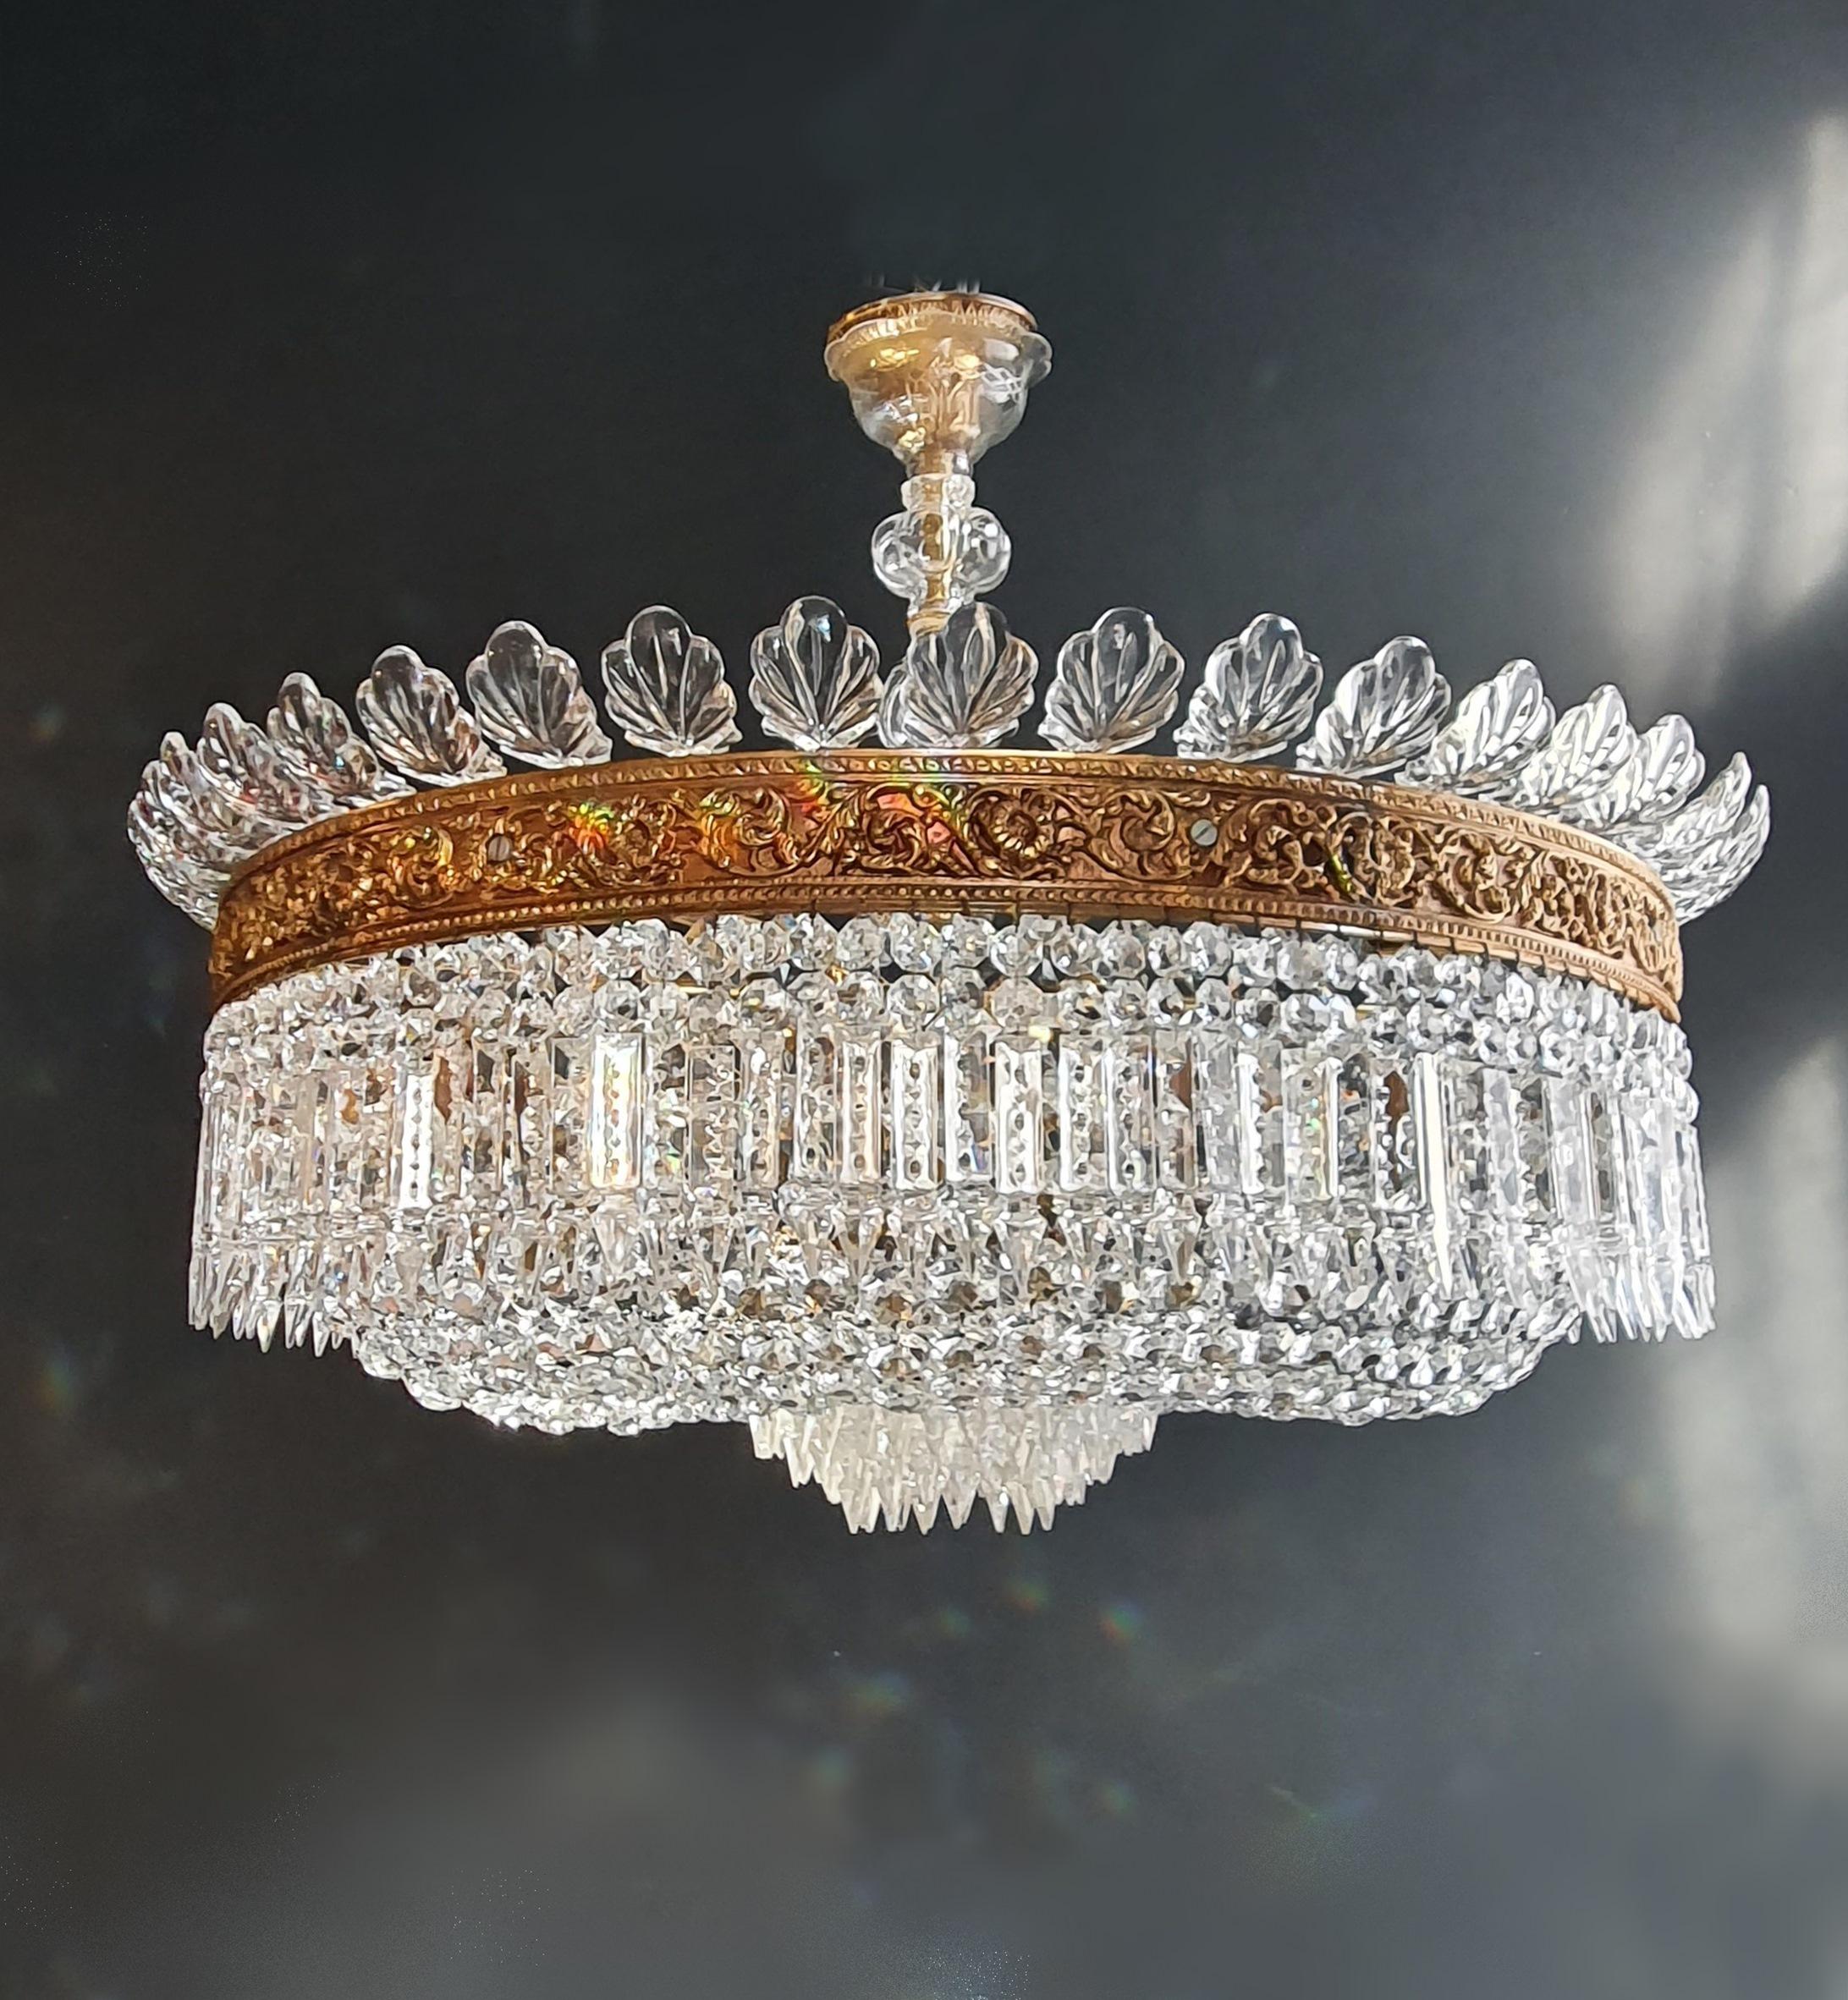 Presenting a pair of exquisite basket chandeliers, designed to complement each other perfectly. Both chandeliers have been thoughtfully restored and revitalized to their original grandeur. The restoration process involved a complete overhaul,